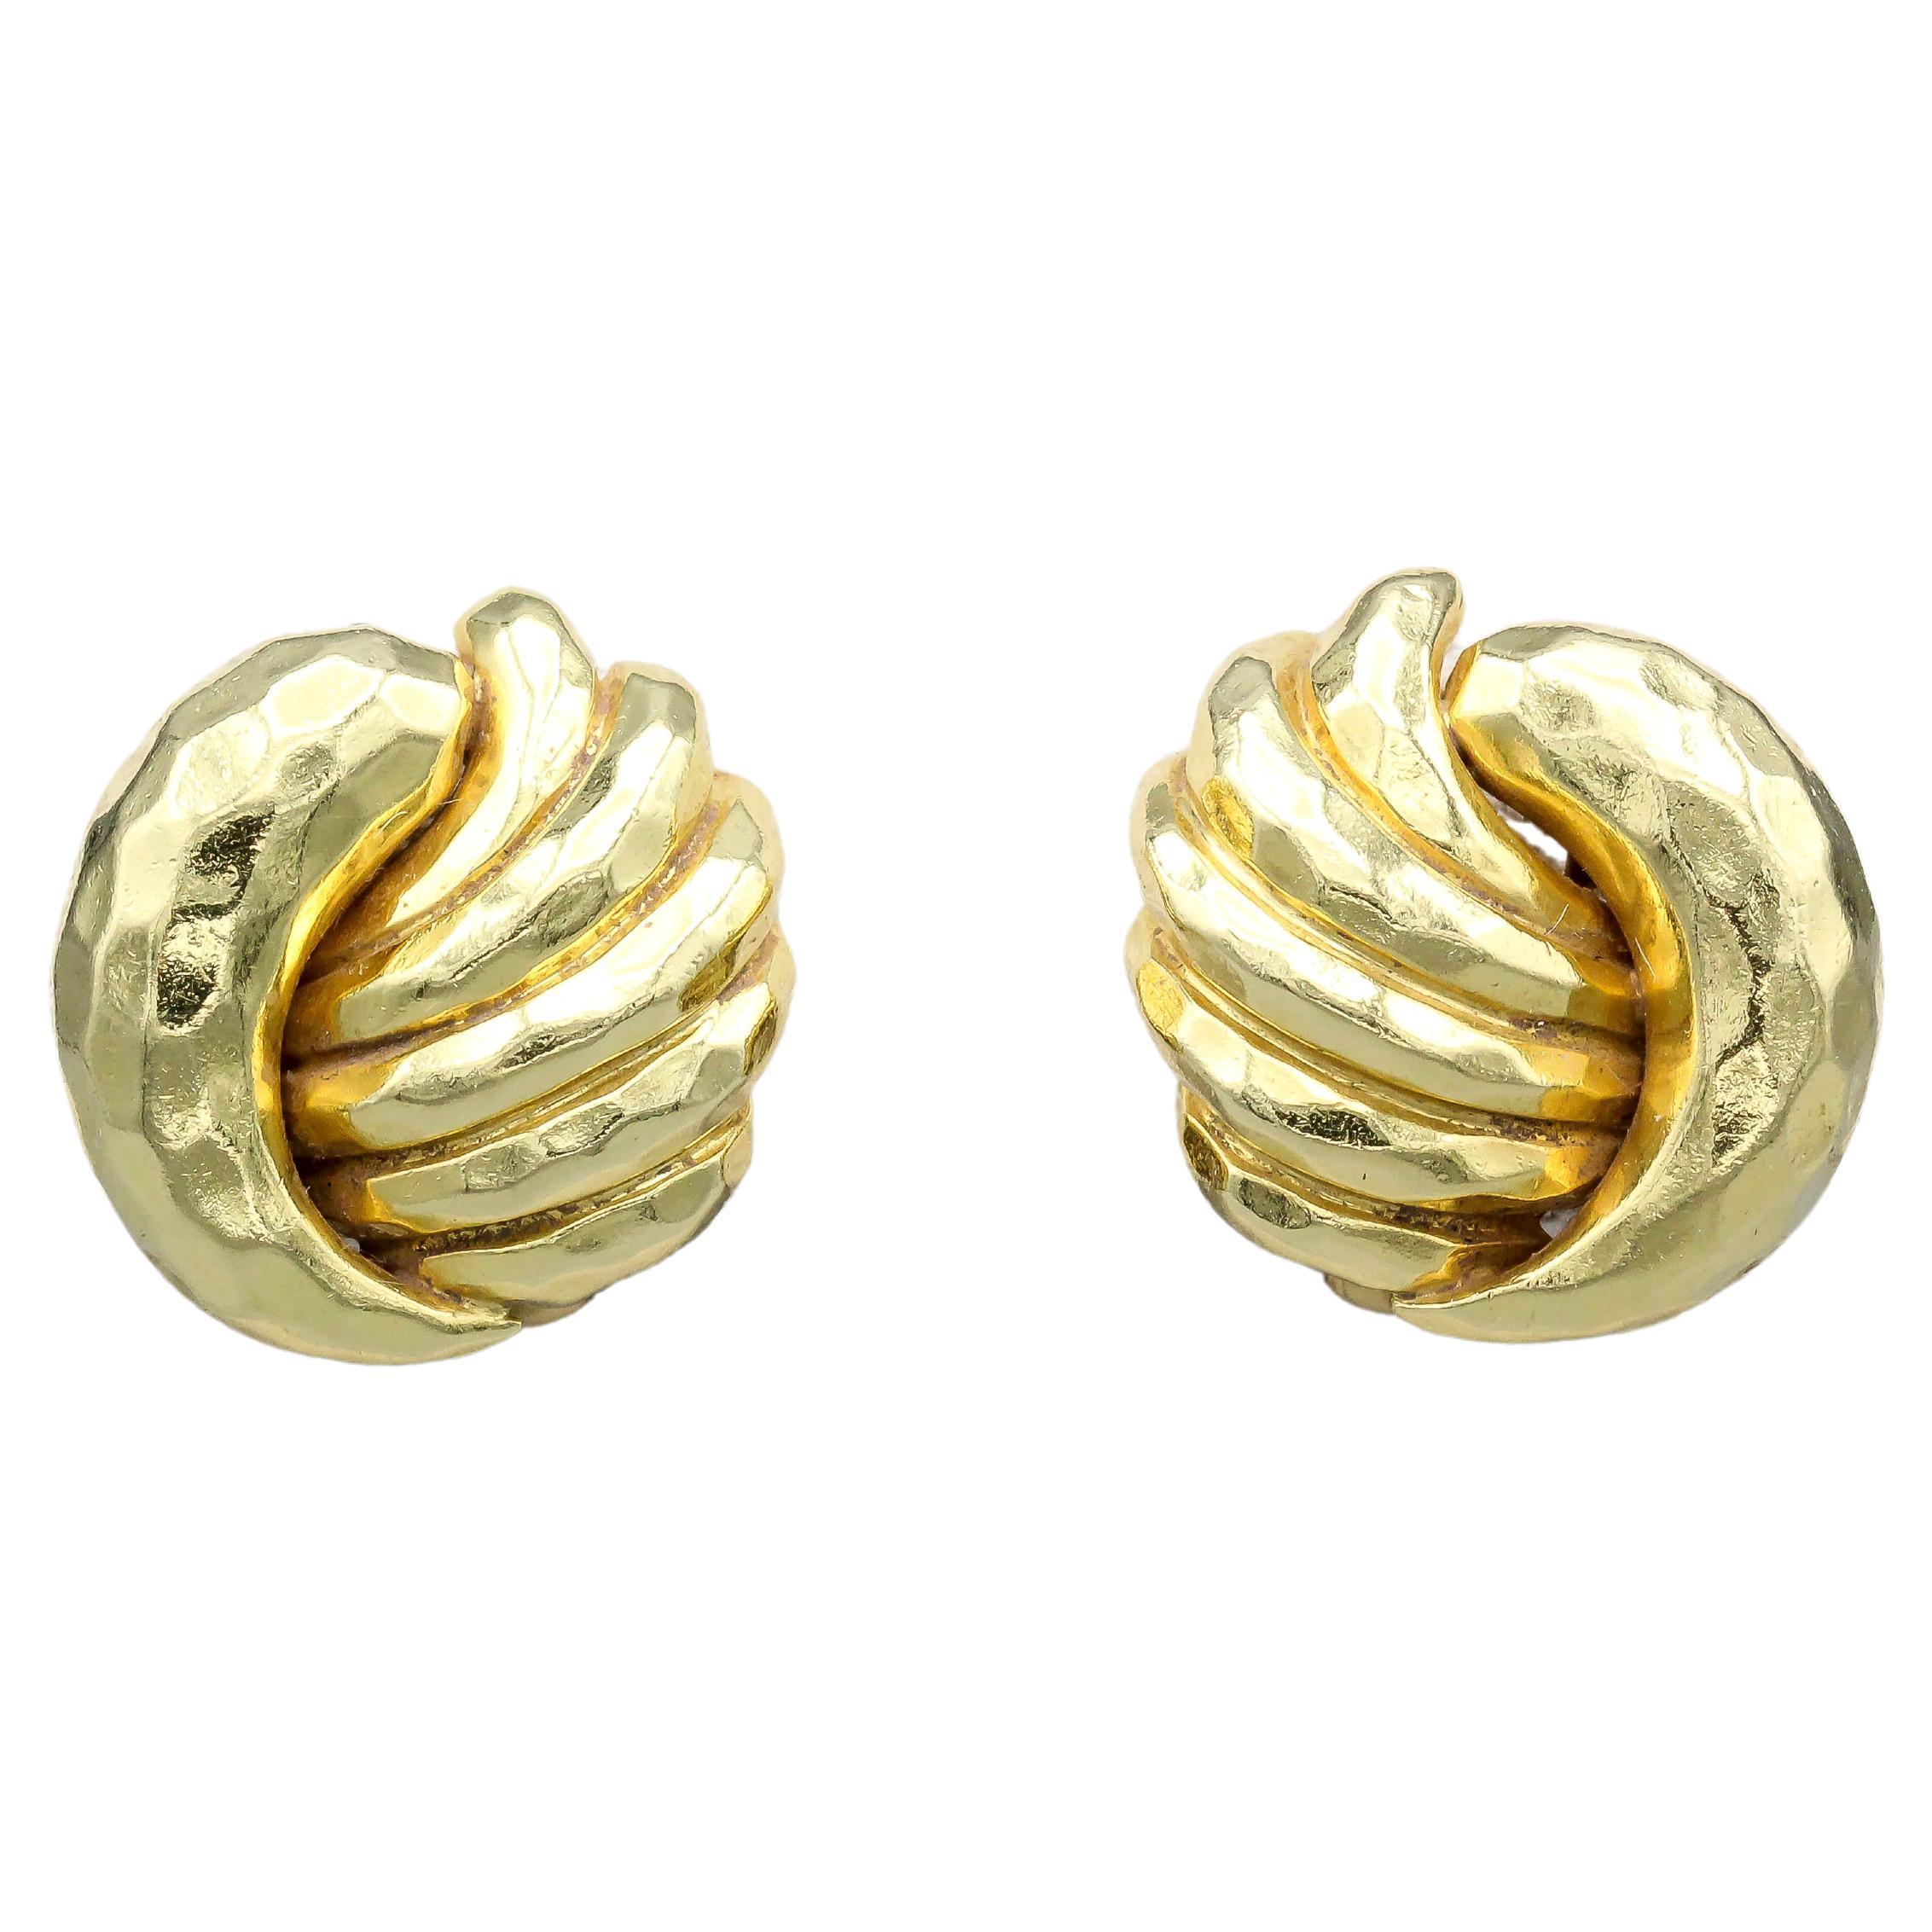 Henry Dunay 18k Yellow Gold Hammered Dome Earrings 